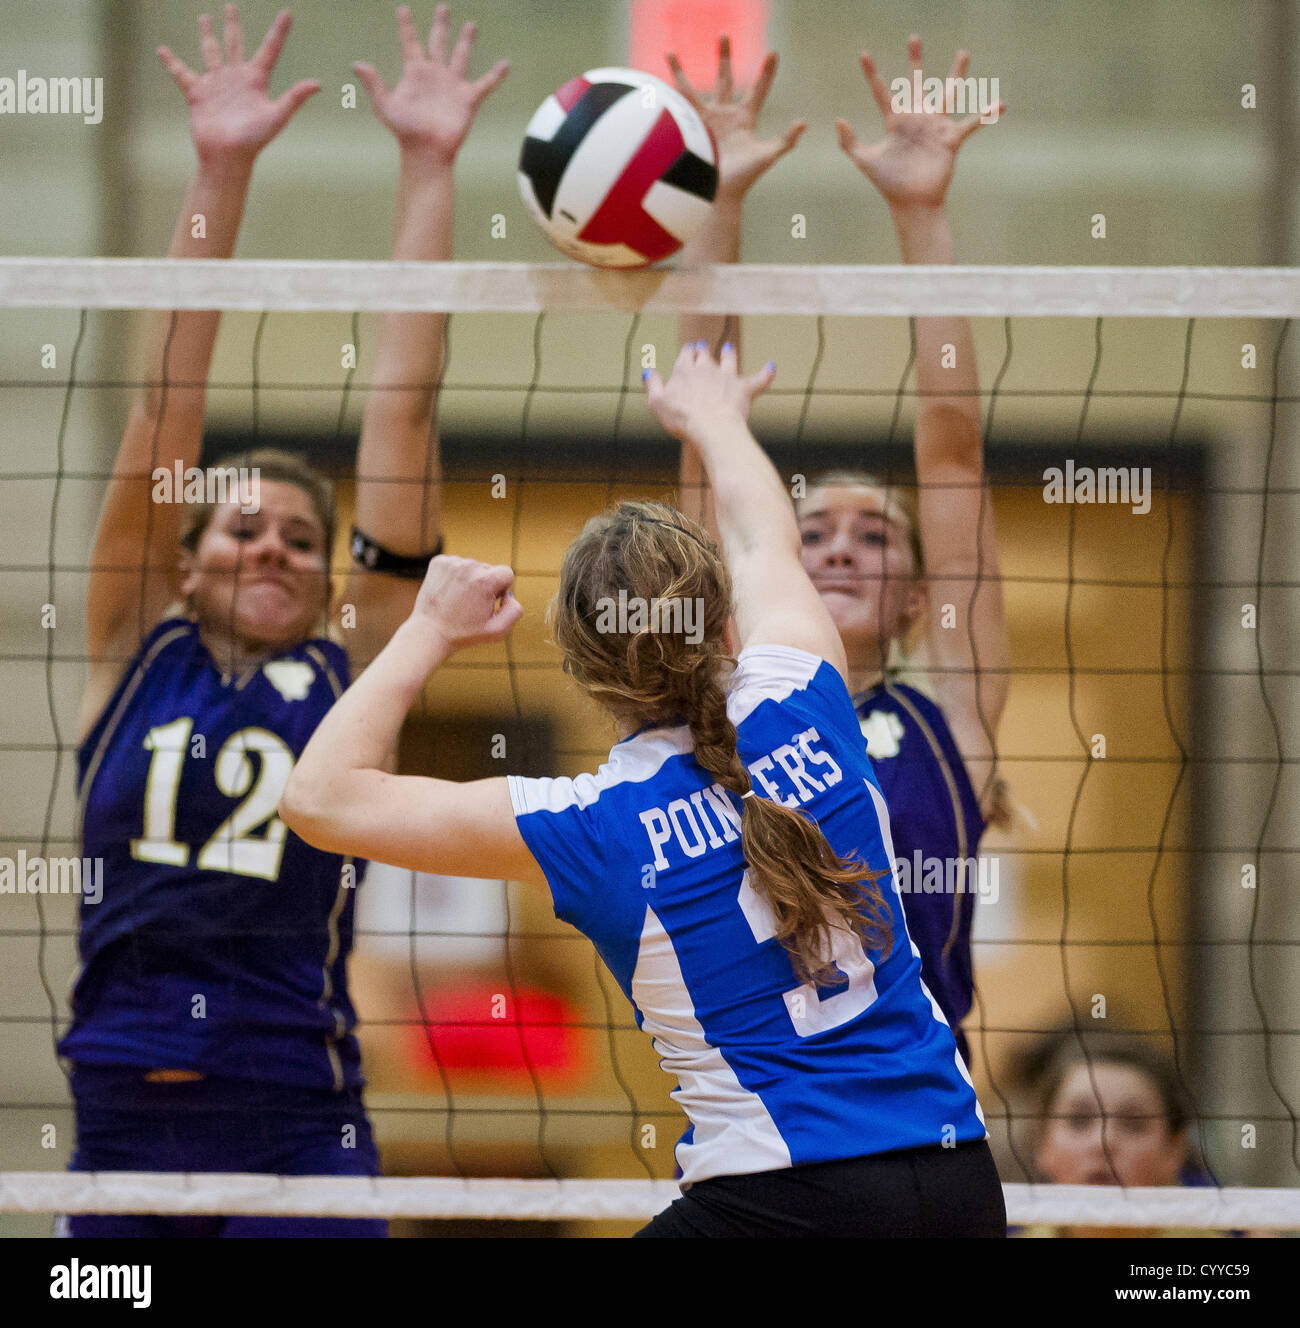 Nov. 12, 2012 - College Park, Maryland, U.S. - Scenes from action during the Sparrows Point High School versus Smithsburg High School match in the Semifinals of the Maryland State Volleyball 1A Championship at Ritchie Coliseum in College Park, Maryland on November 12, 2012. Smithsburg defeated Sparrows Point in straight sets 25-10, 25-12, 25-10 to advance to the State Finals. (Credit Image: © Scott Serio/Eclipse/ZUMAPRESS.com) Stock Photo